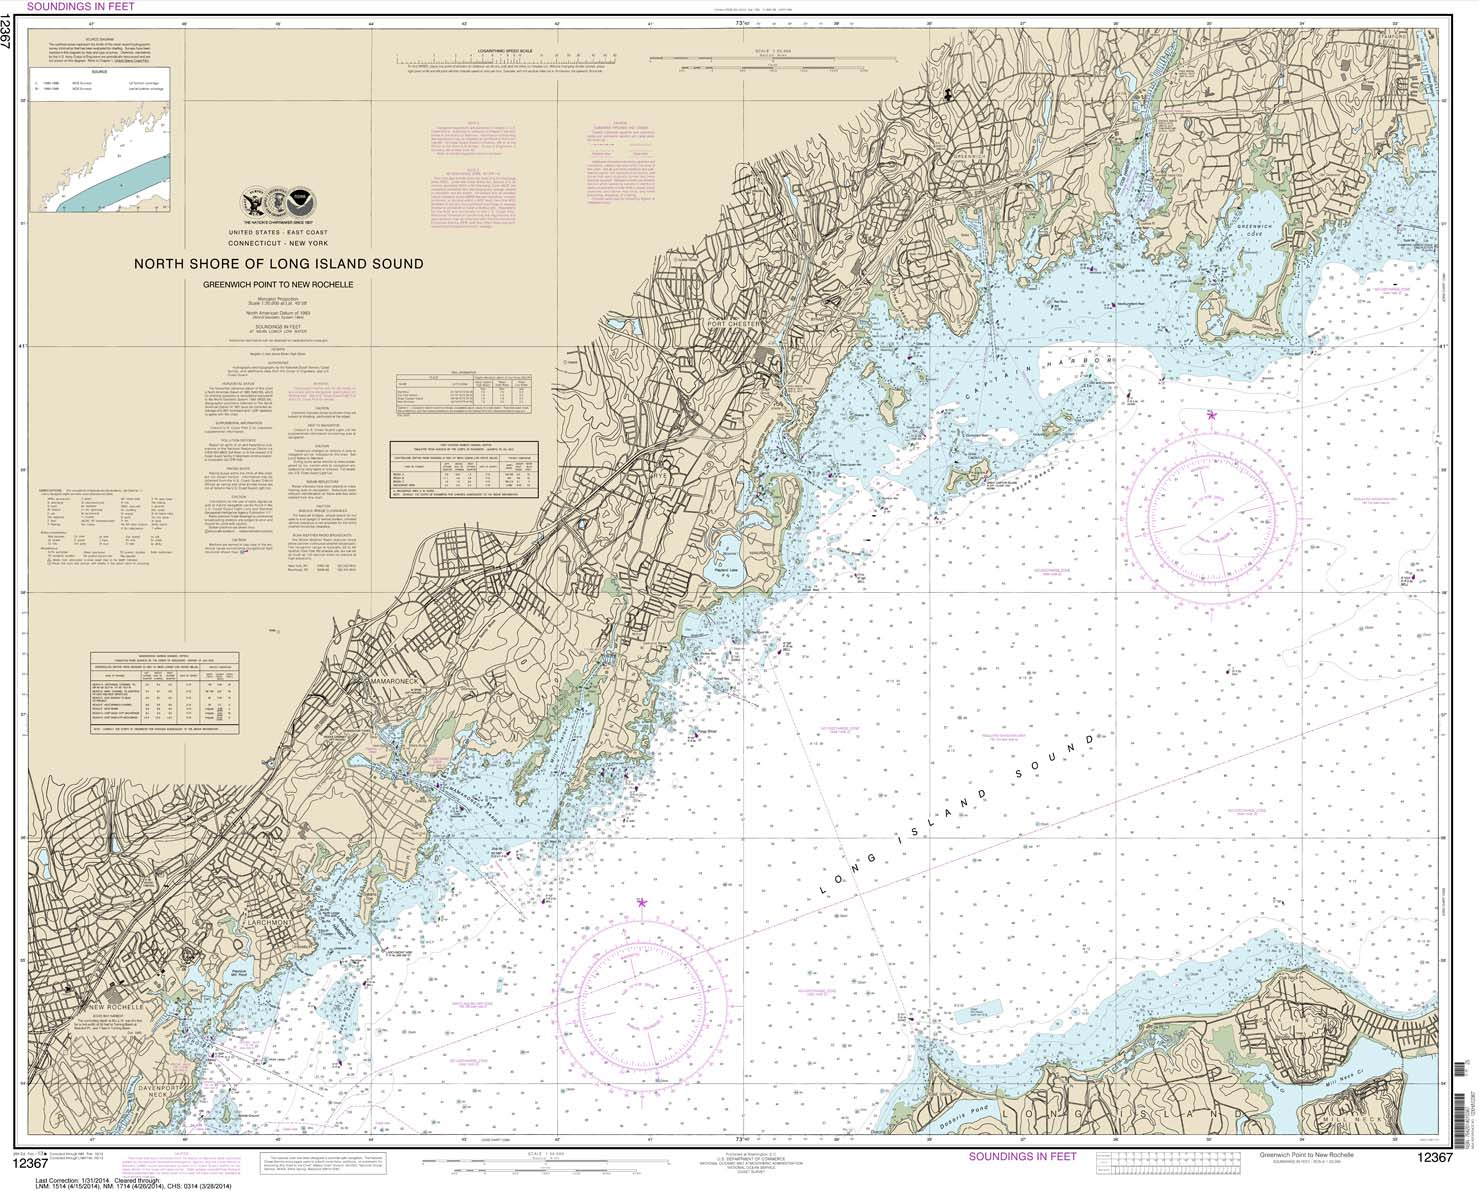 HISTORICAL NOAA Chart 12367: North Shore of Long Island Sound Greenwich Point to New Rochelle